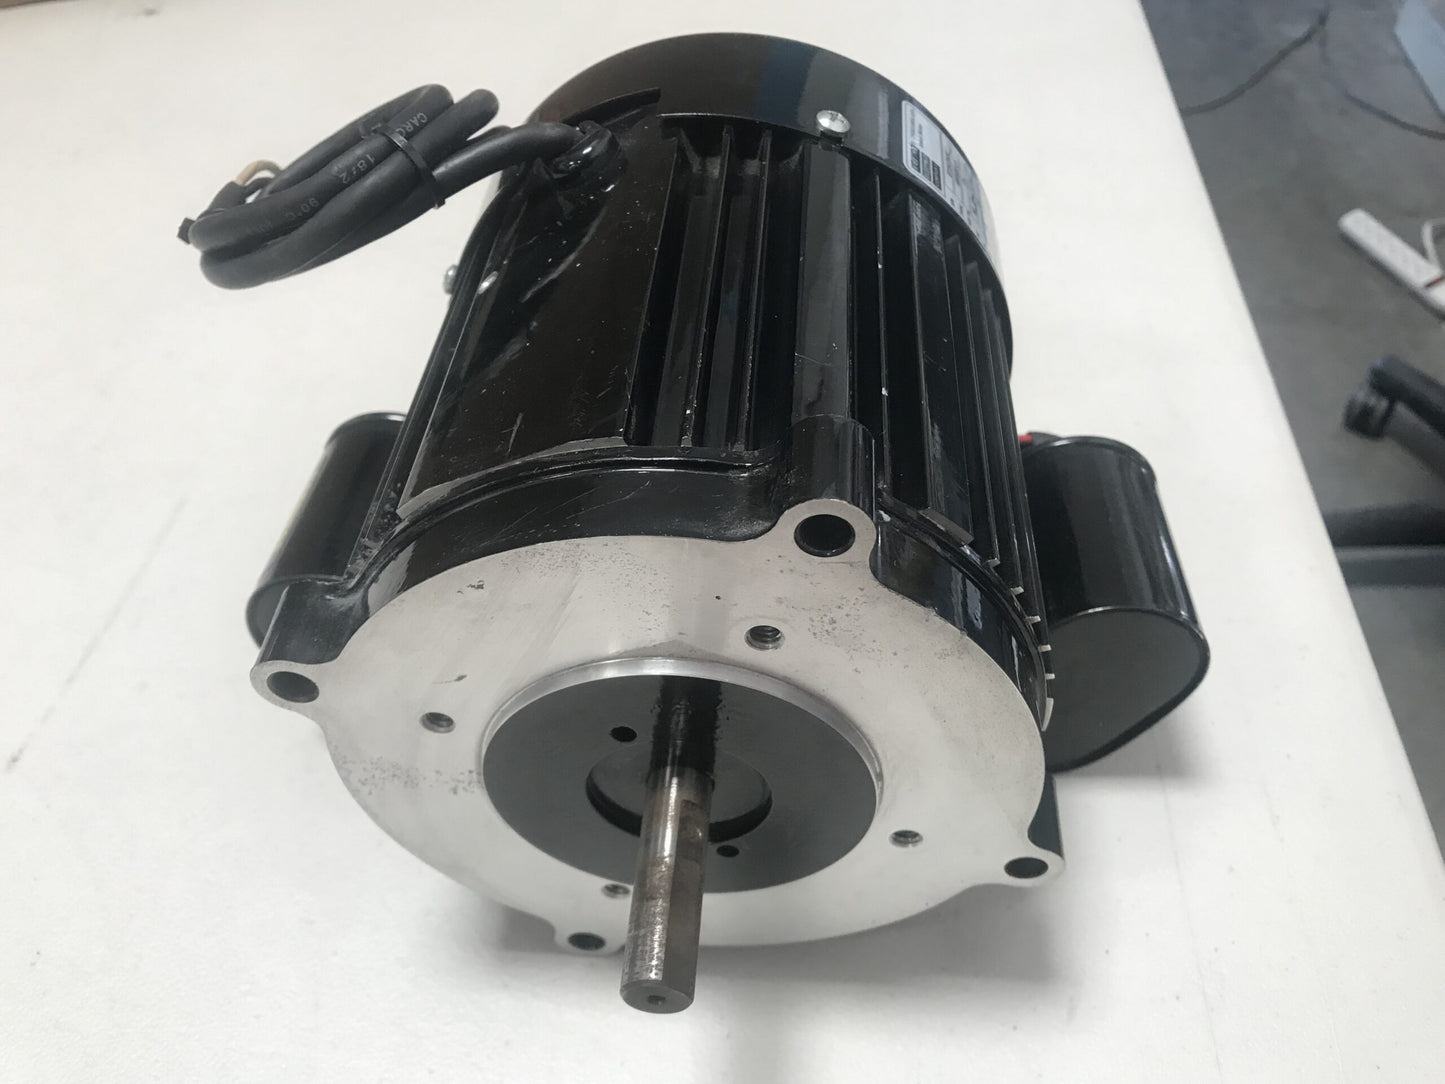 8R5BFDY BODINE SMALL MOTOR